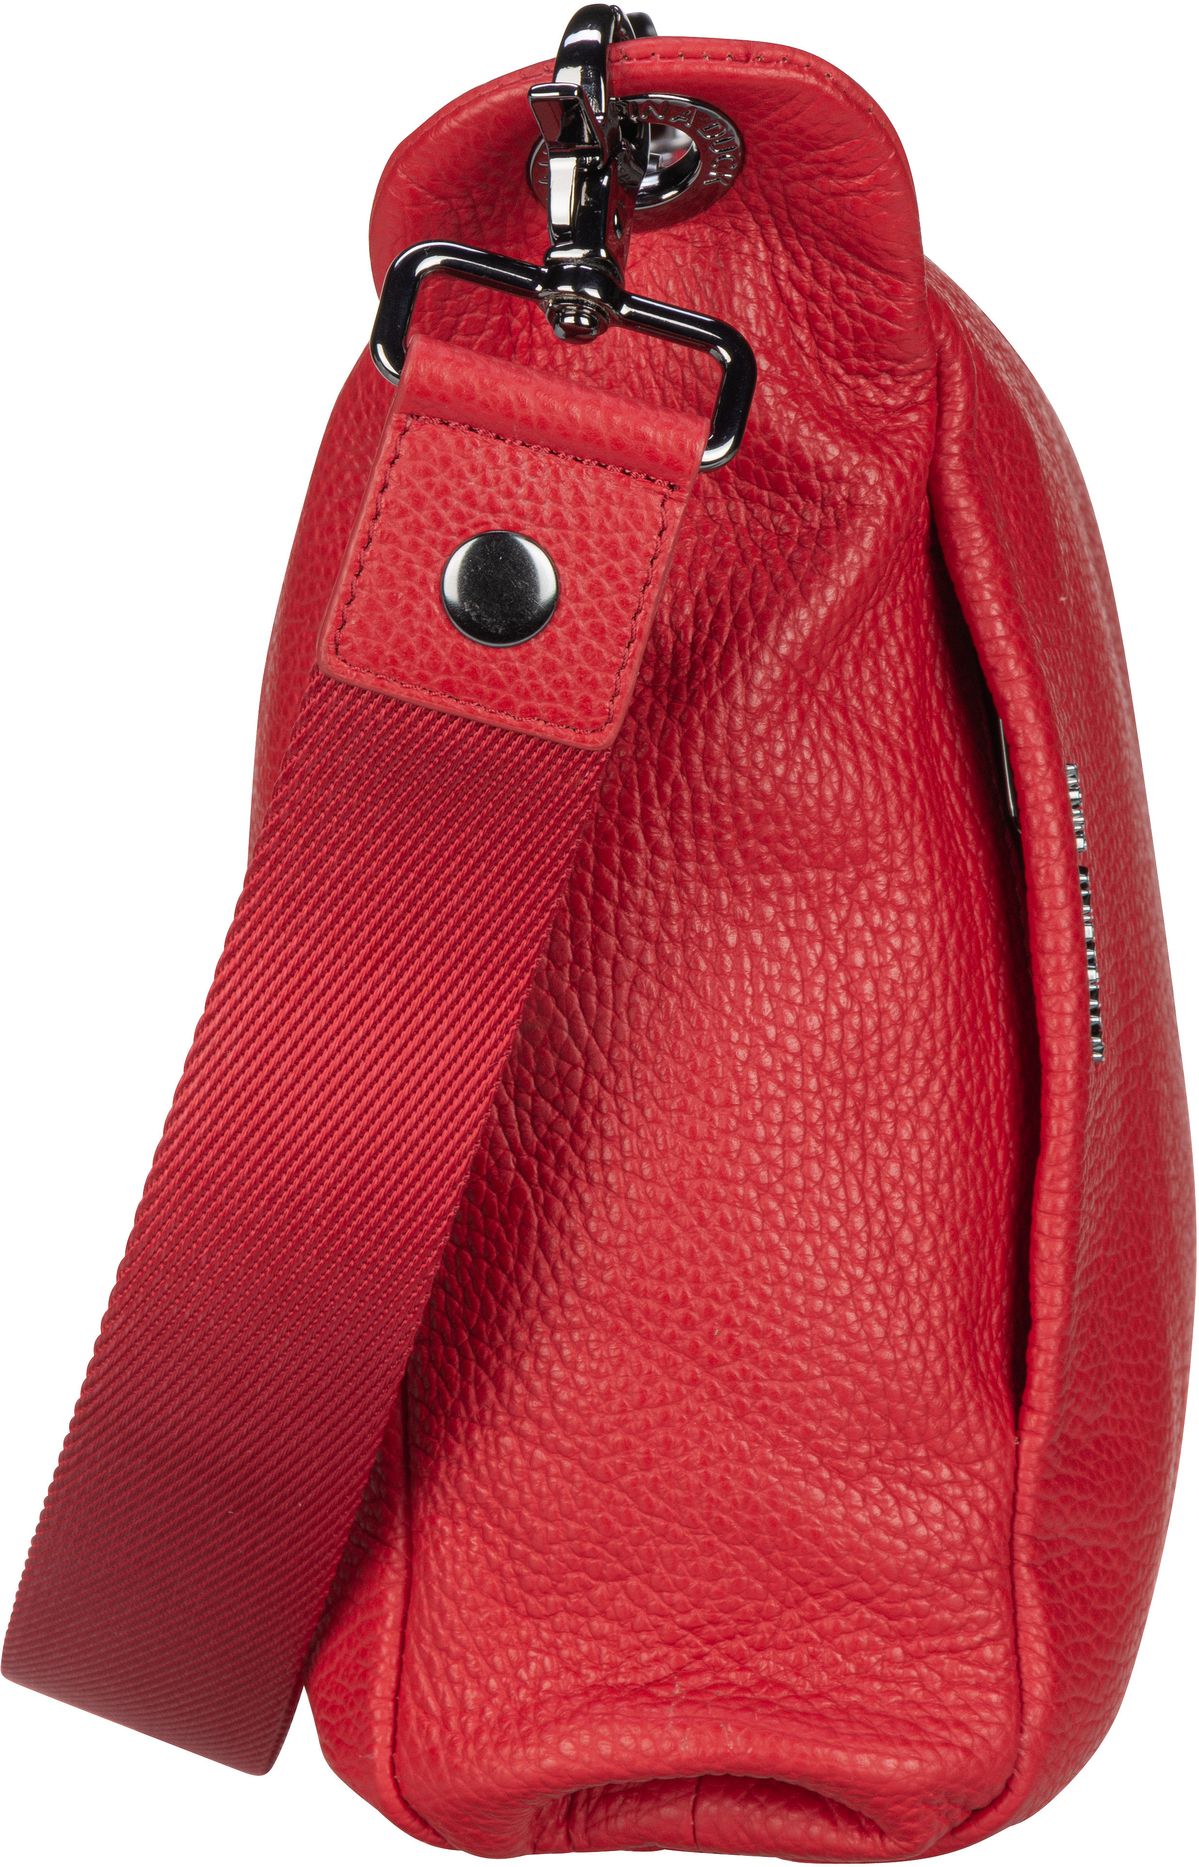 Mandarina Duck Mellow Leather Crossover Small - Flame Scarlet